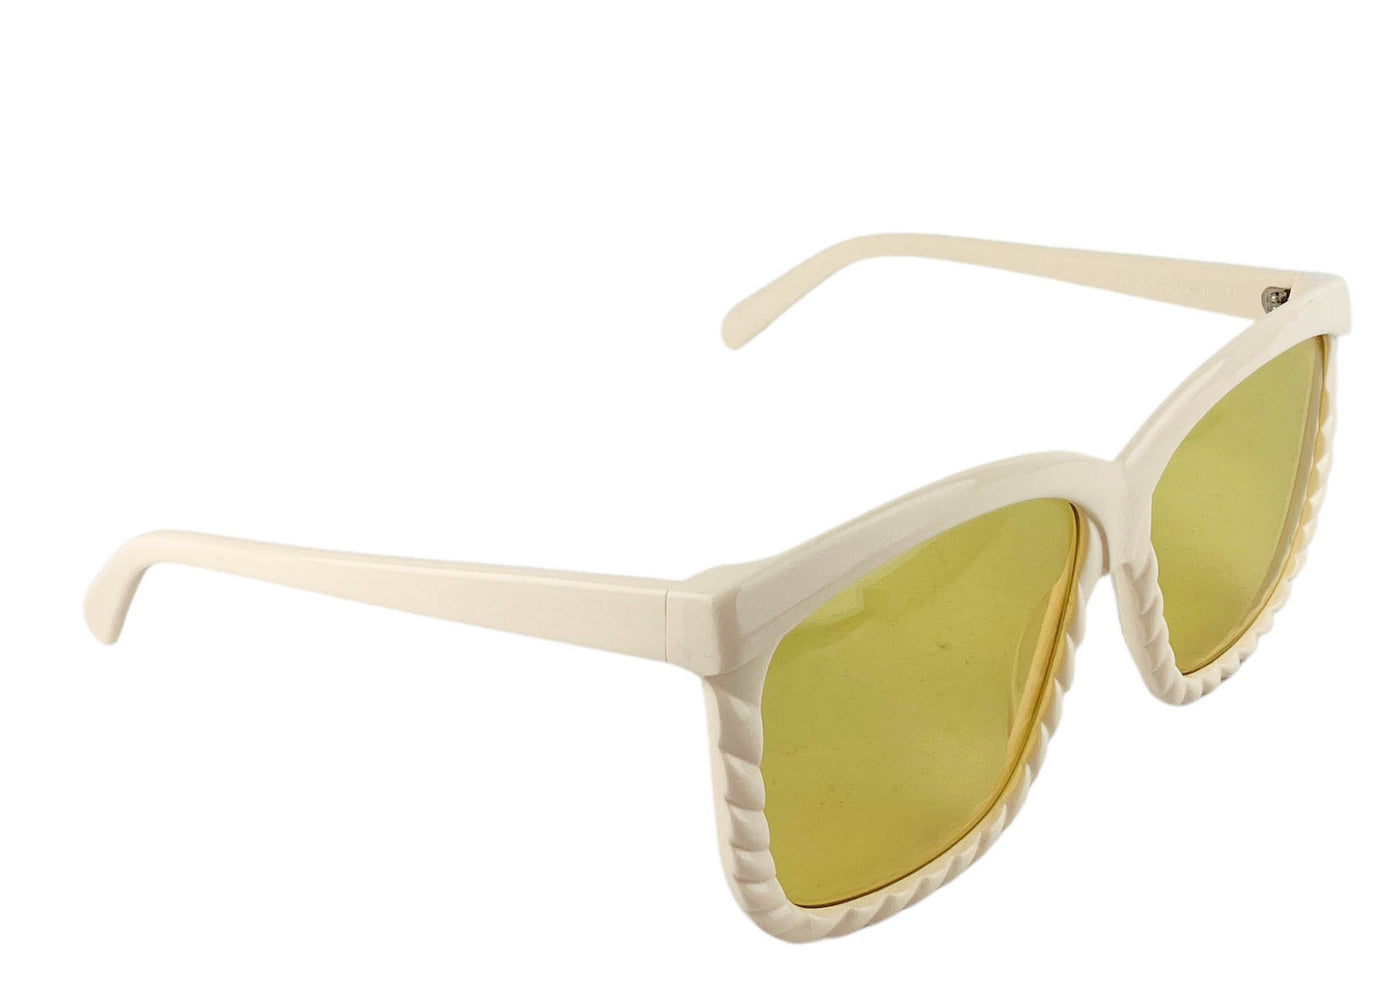 Ulla Johnson Esther Sunglasses in Cowrie - Discounts on Ulla Johnson at UAL